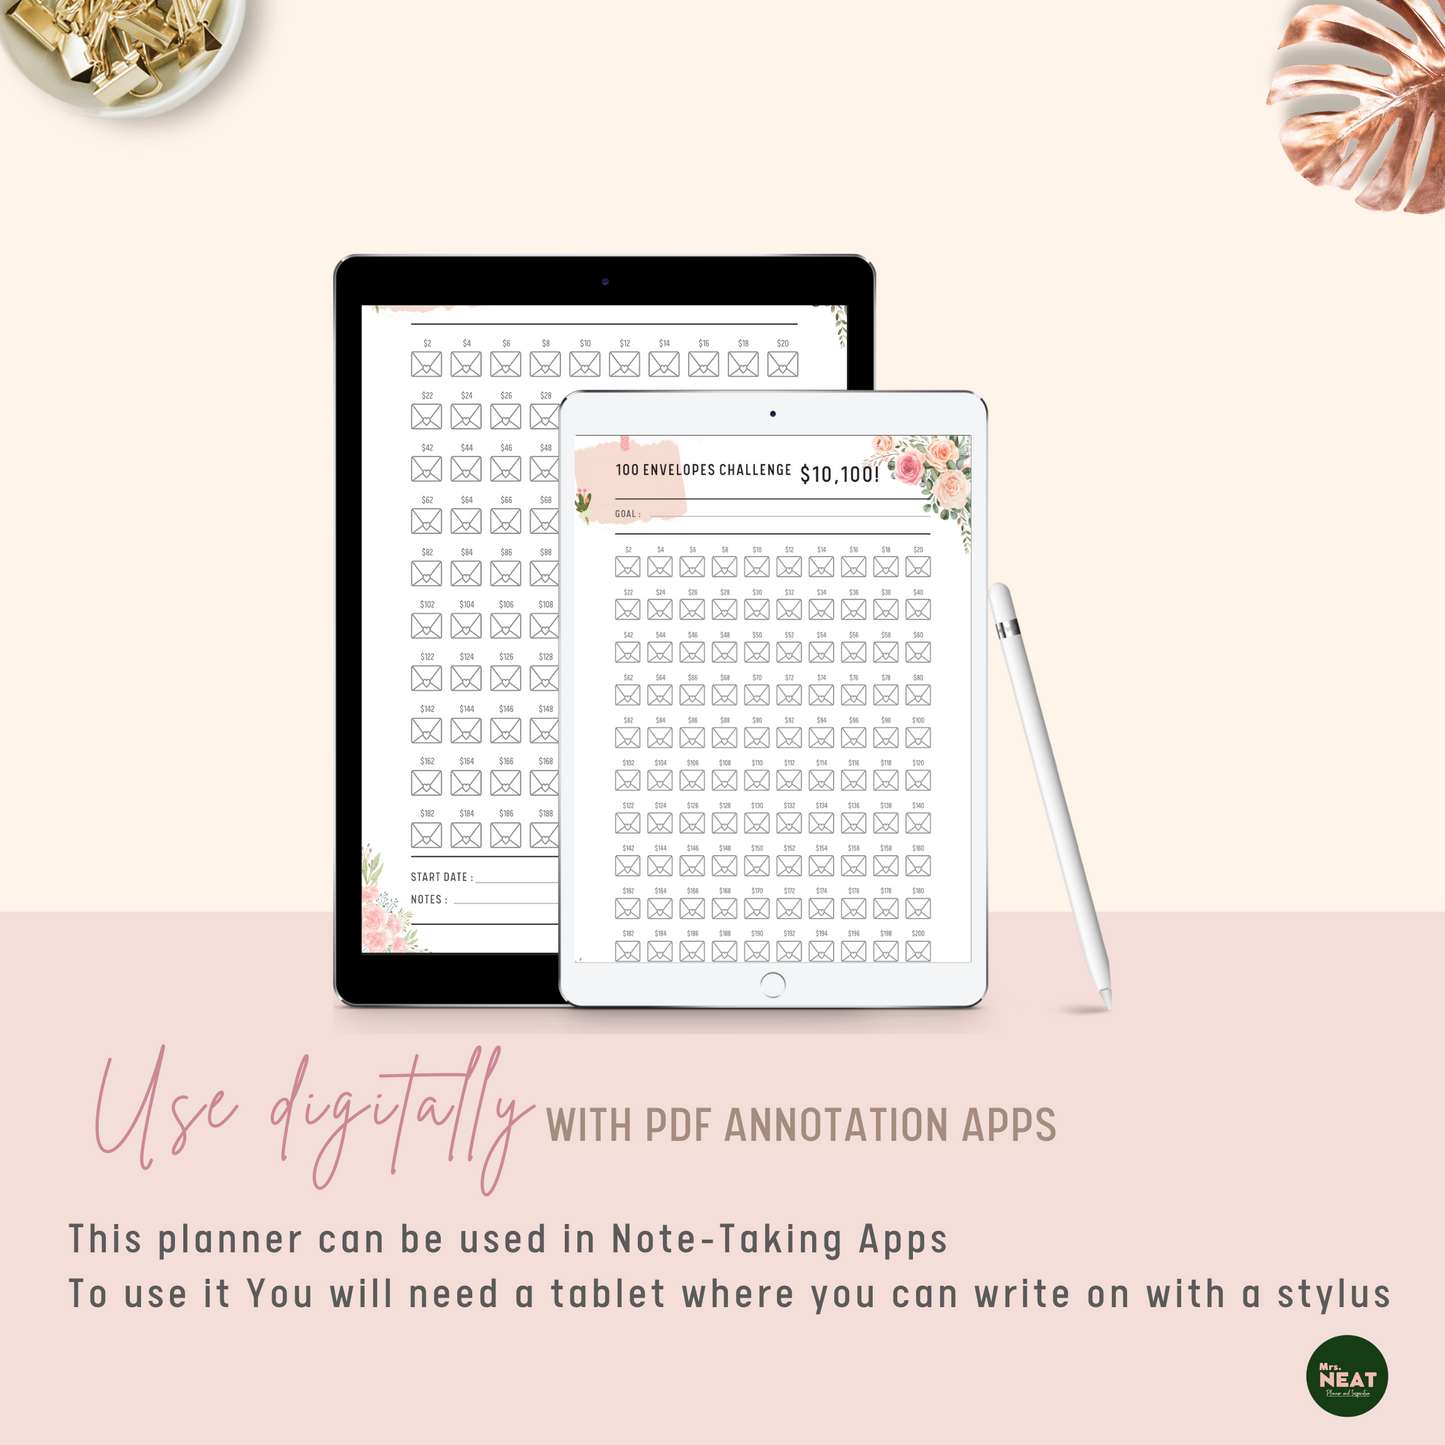 Floral $10,100 in 100 Envelopes Challenge Planner can be use digitally with PDF Annotation Apps